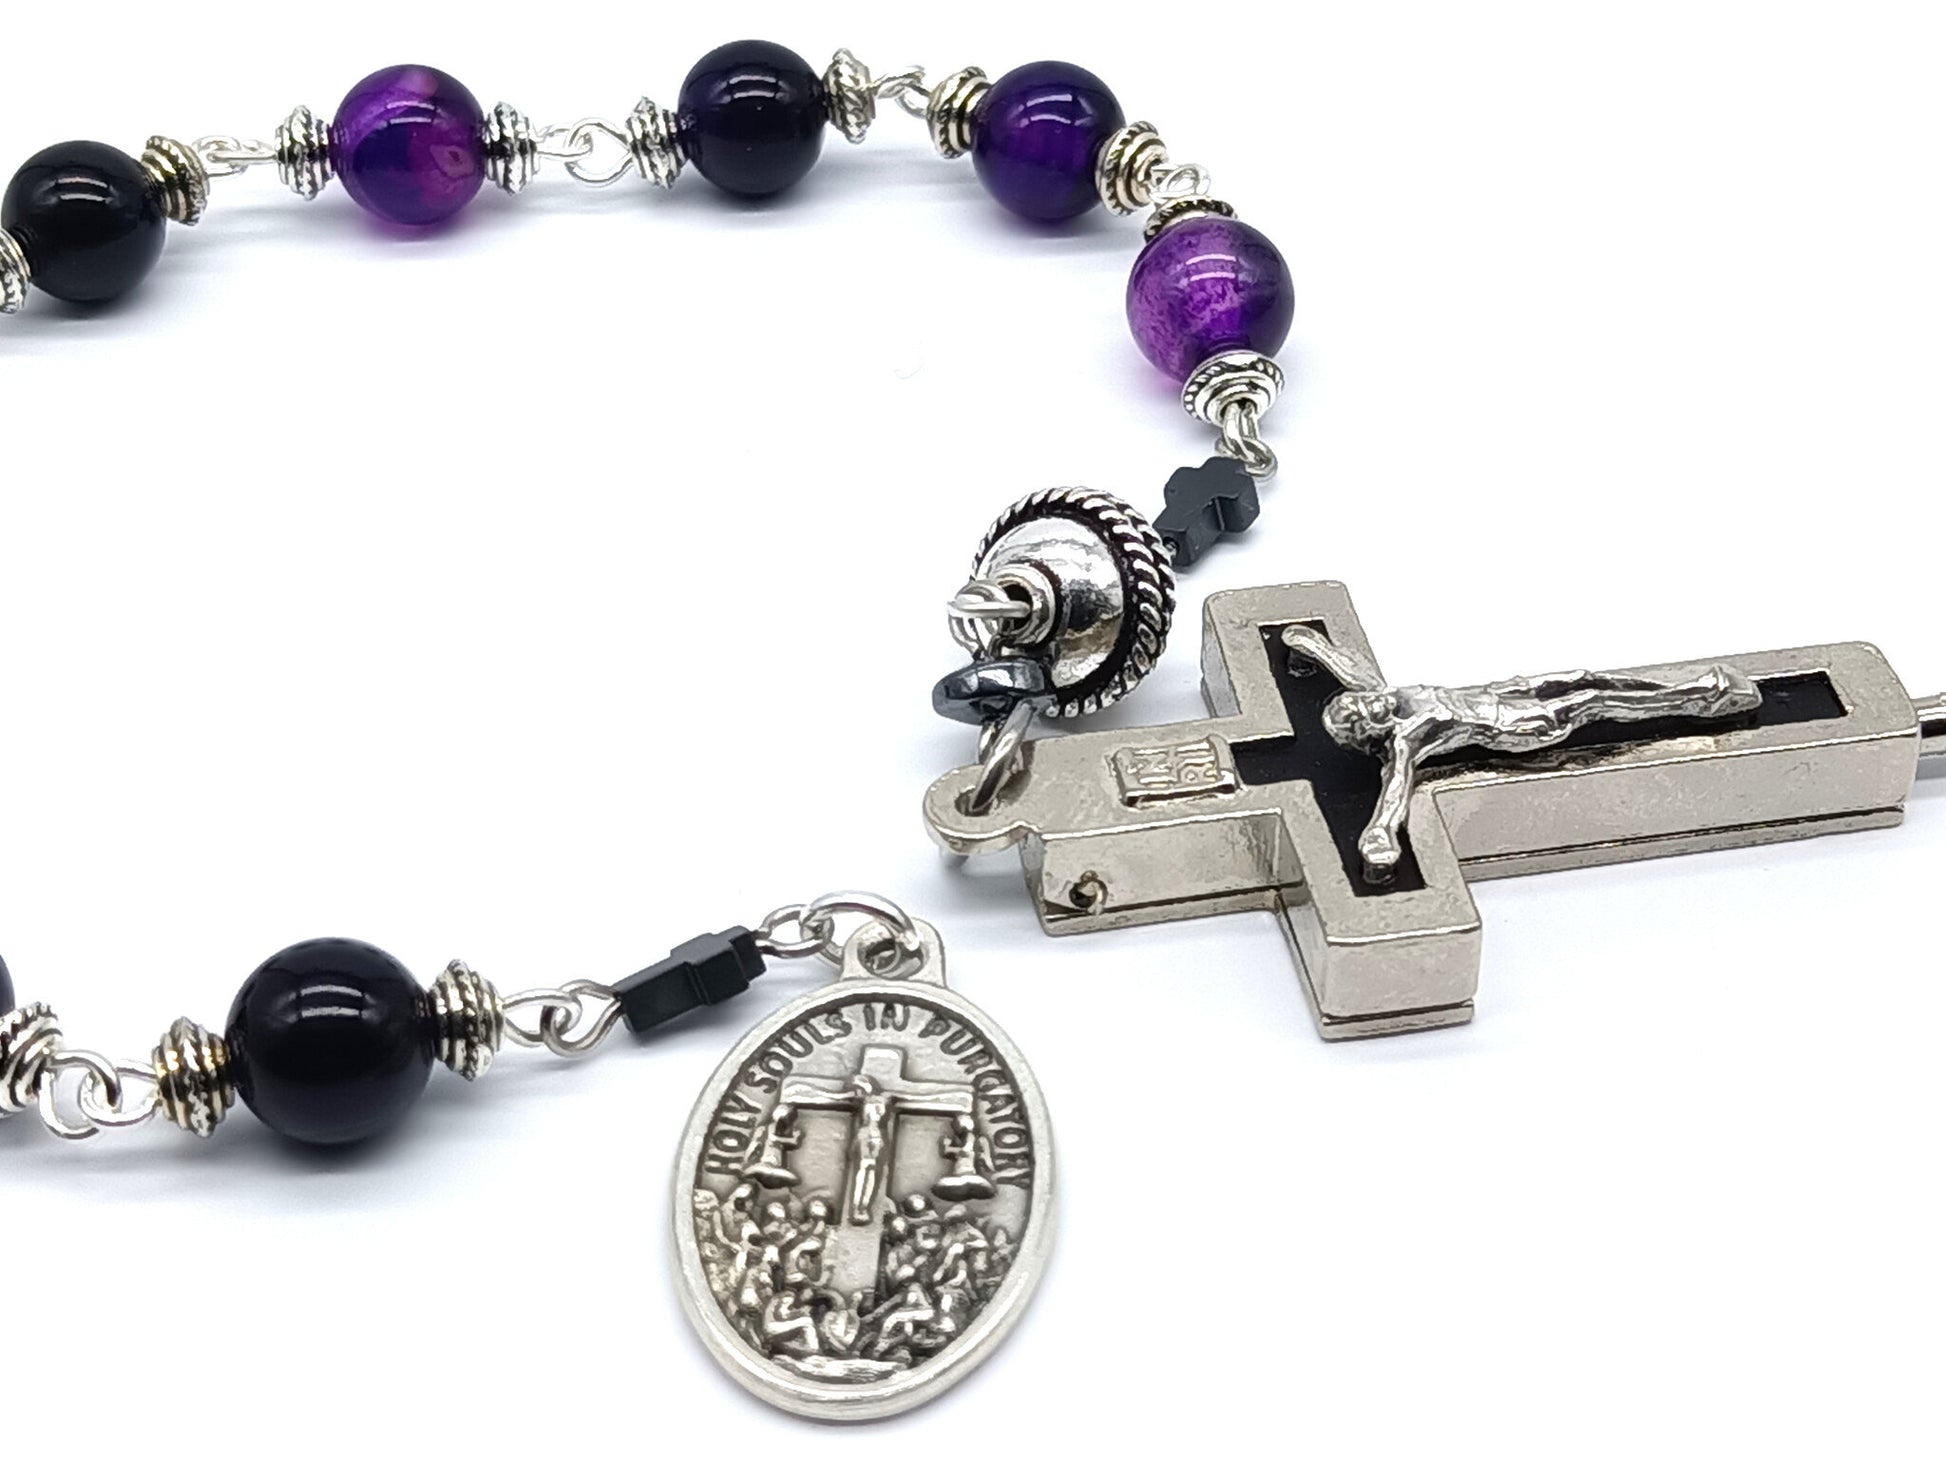 Holy Souls unique rosary beads single decade with purple agate gemstone beads, relic holder crucifix, silver pater bead and medal.